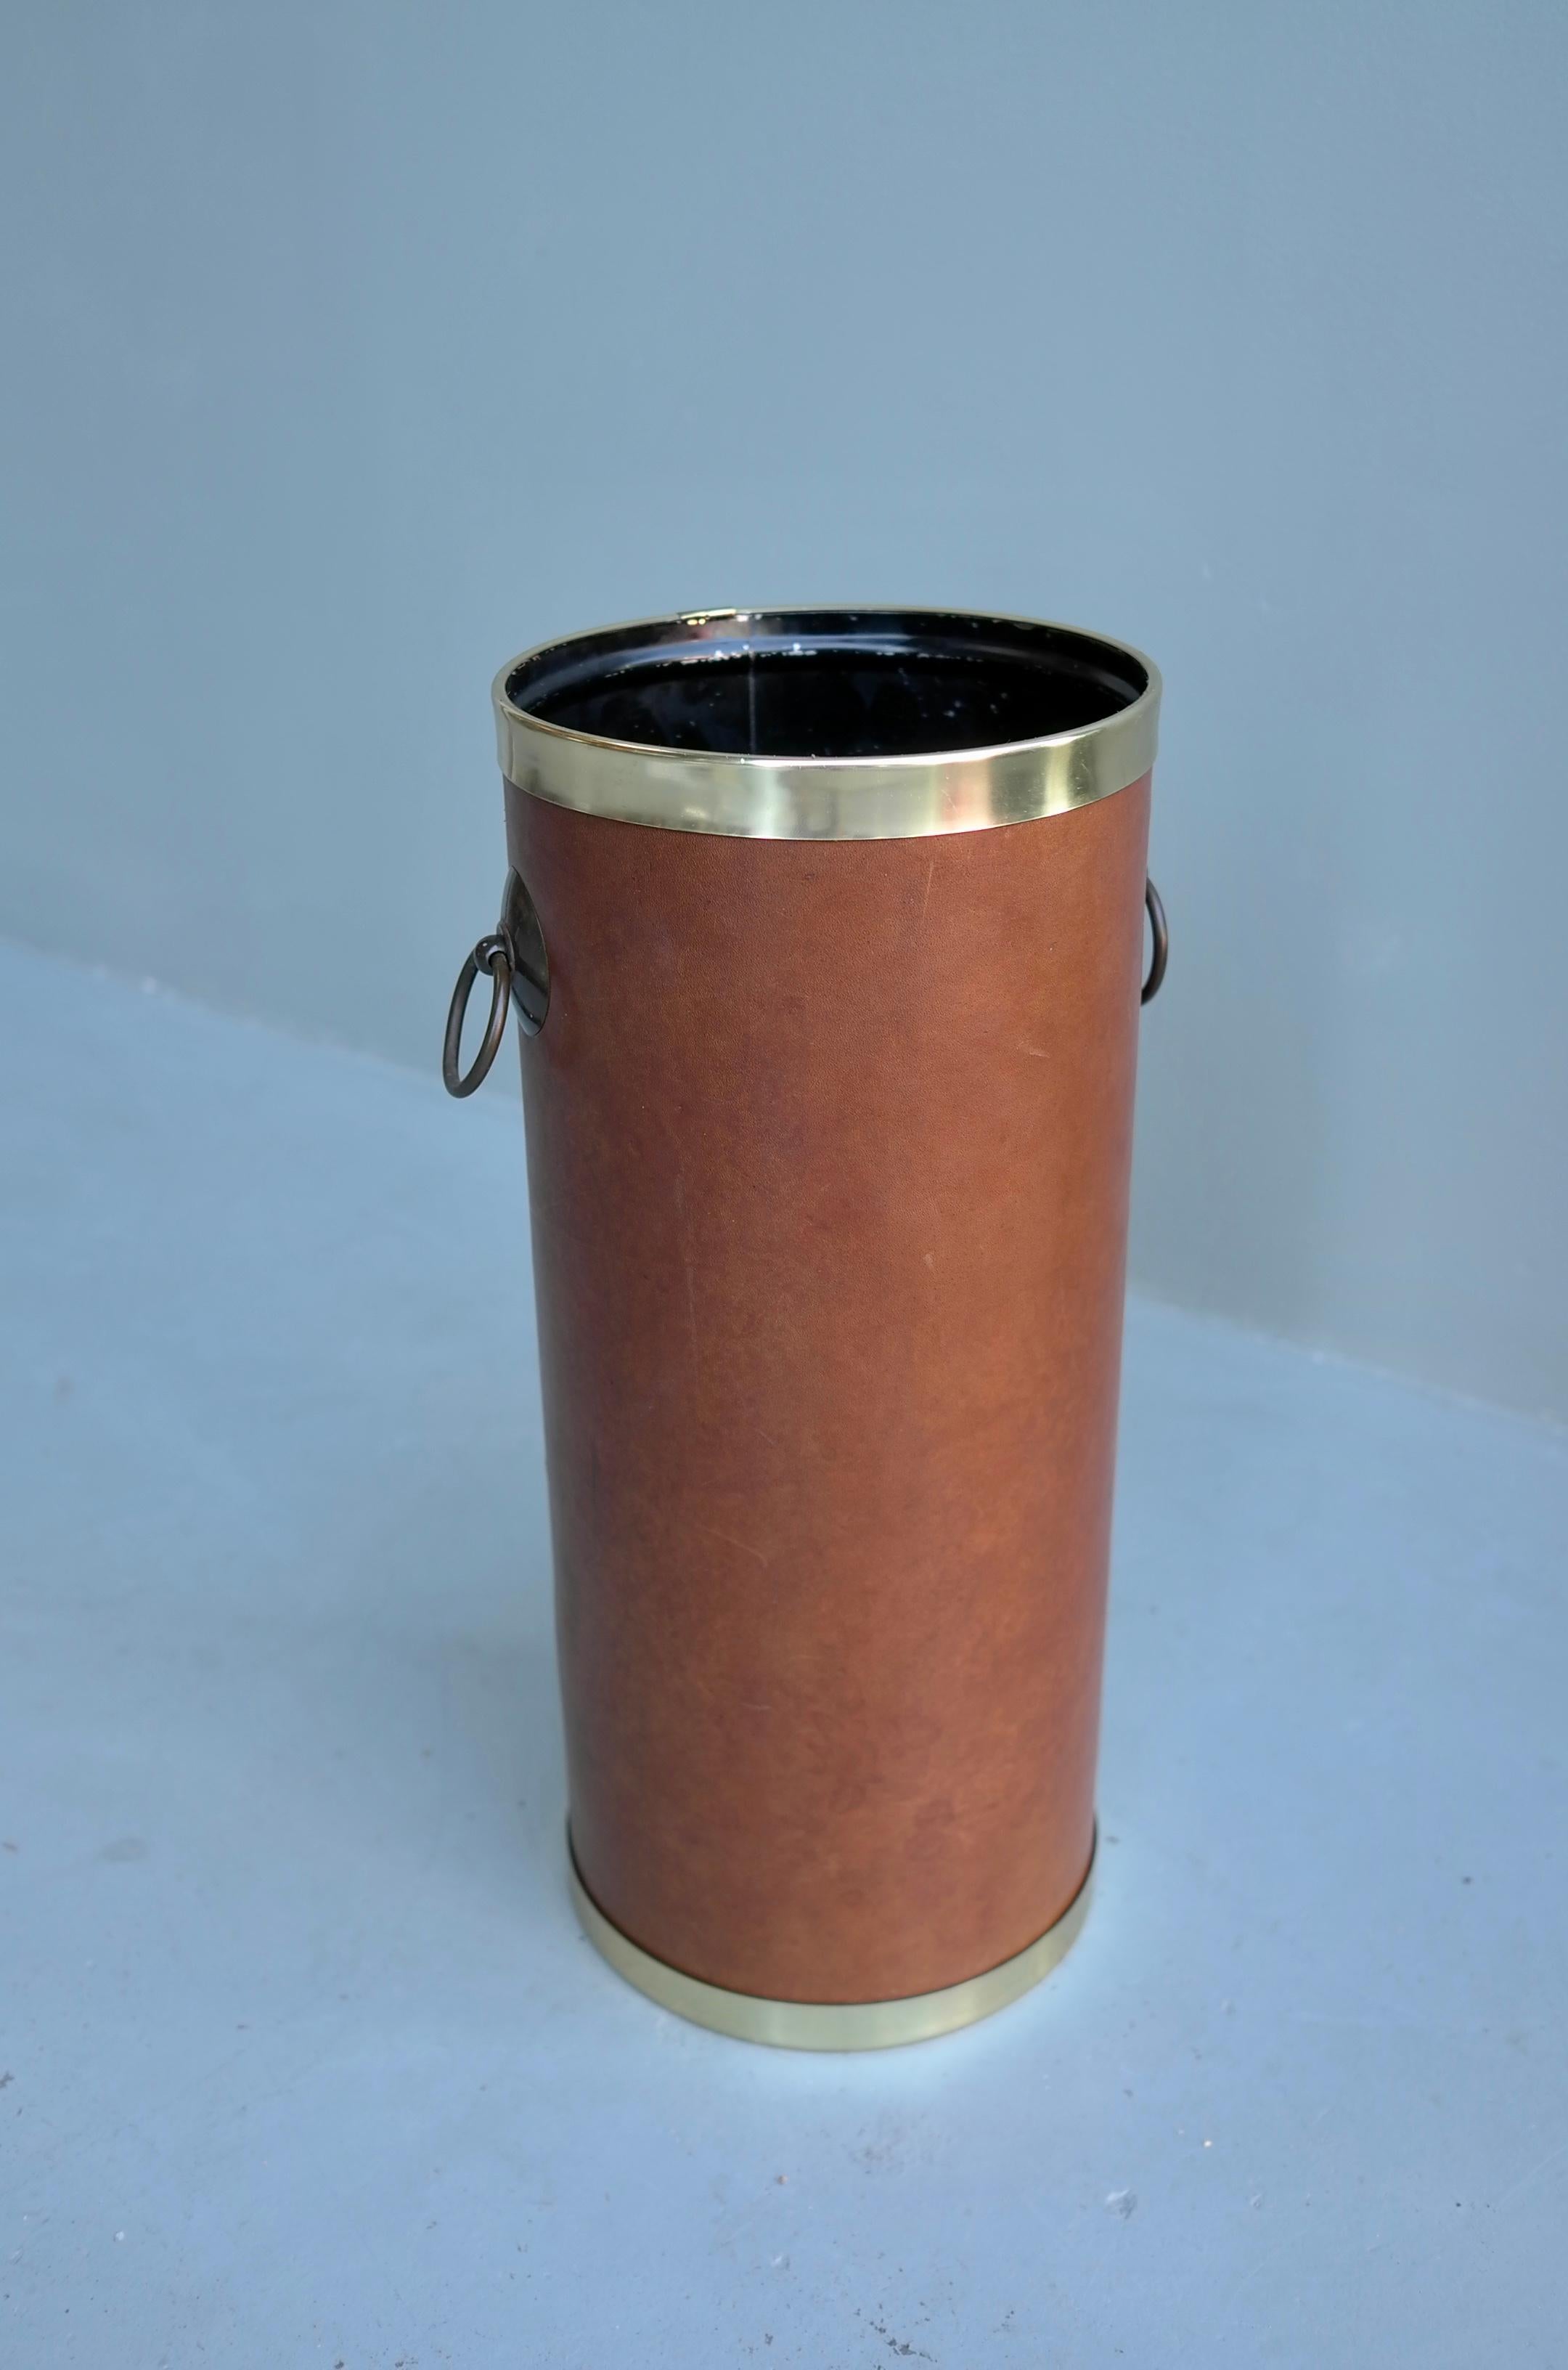 Cognac Mid-Century Modern Leather and Brass Umbrella Stand, France, 1960s For Sale 2